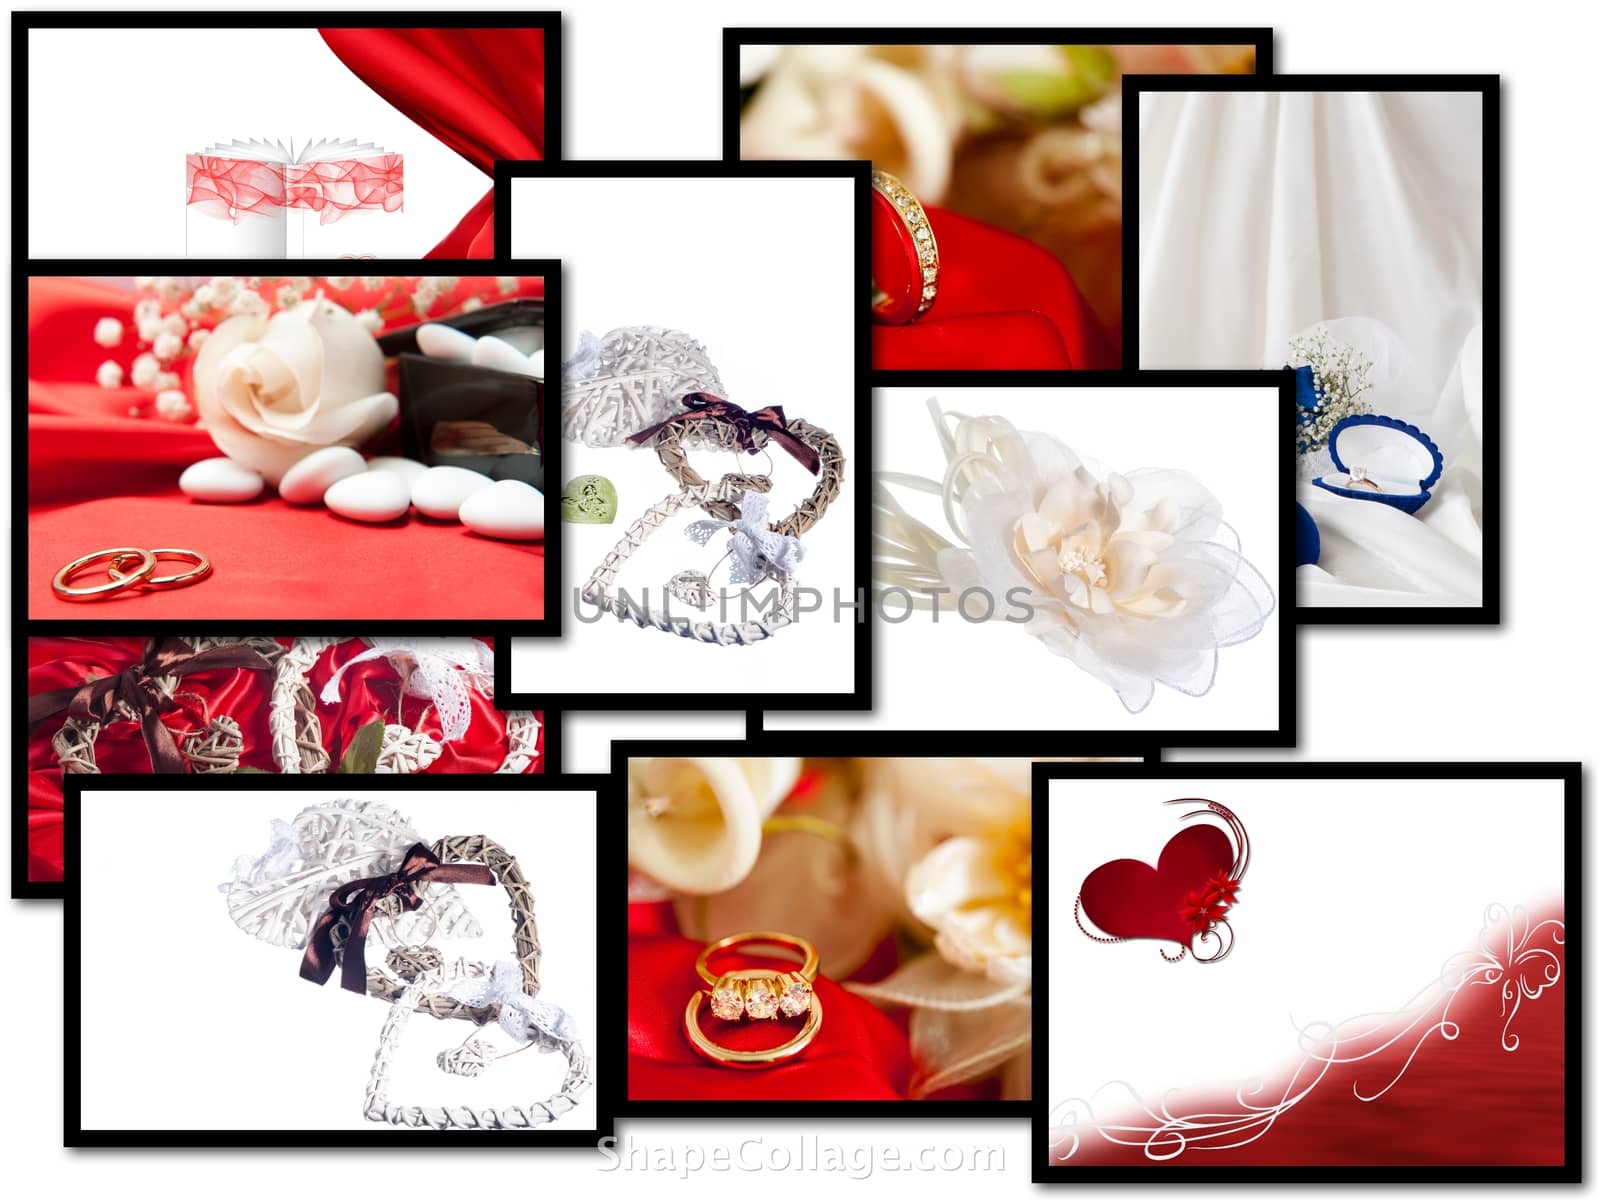 a collage wedding ring and wedding ffavors